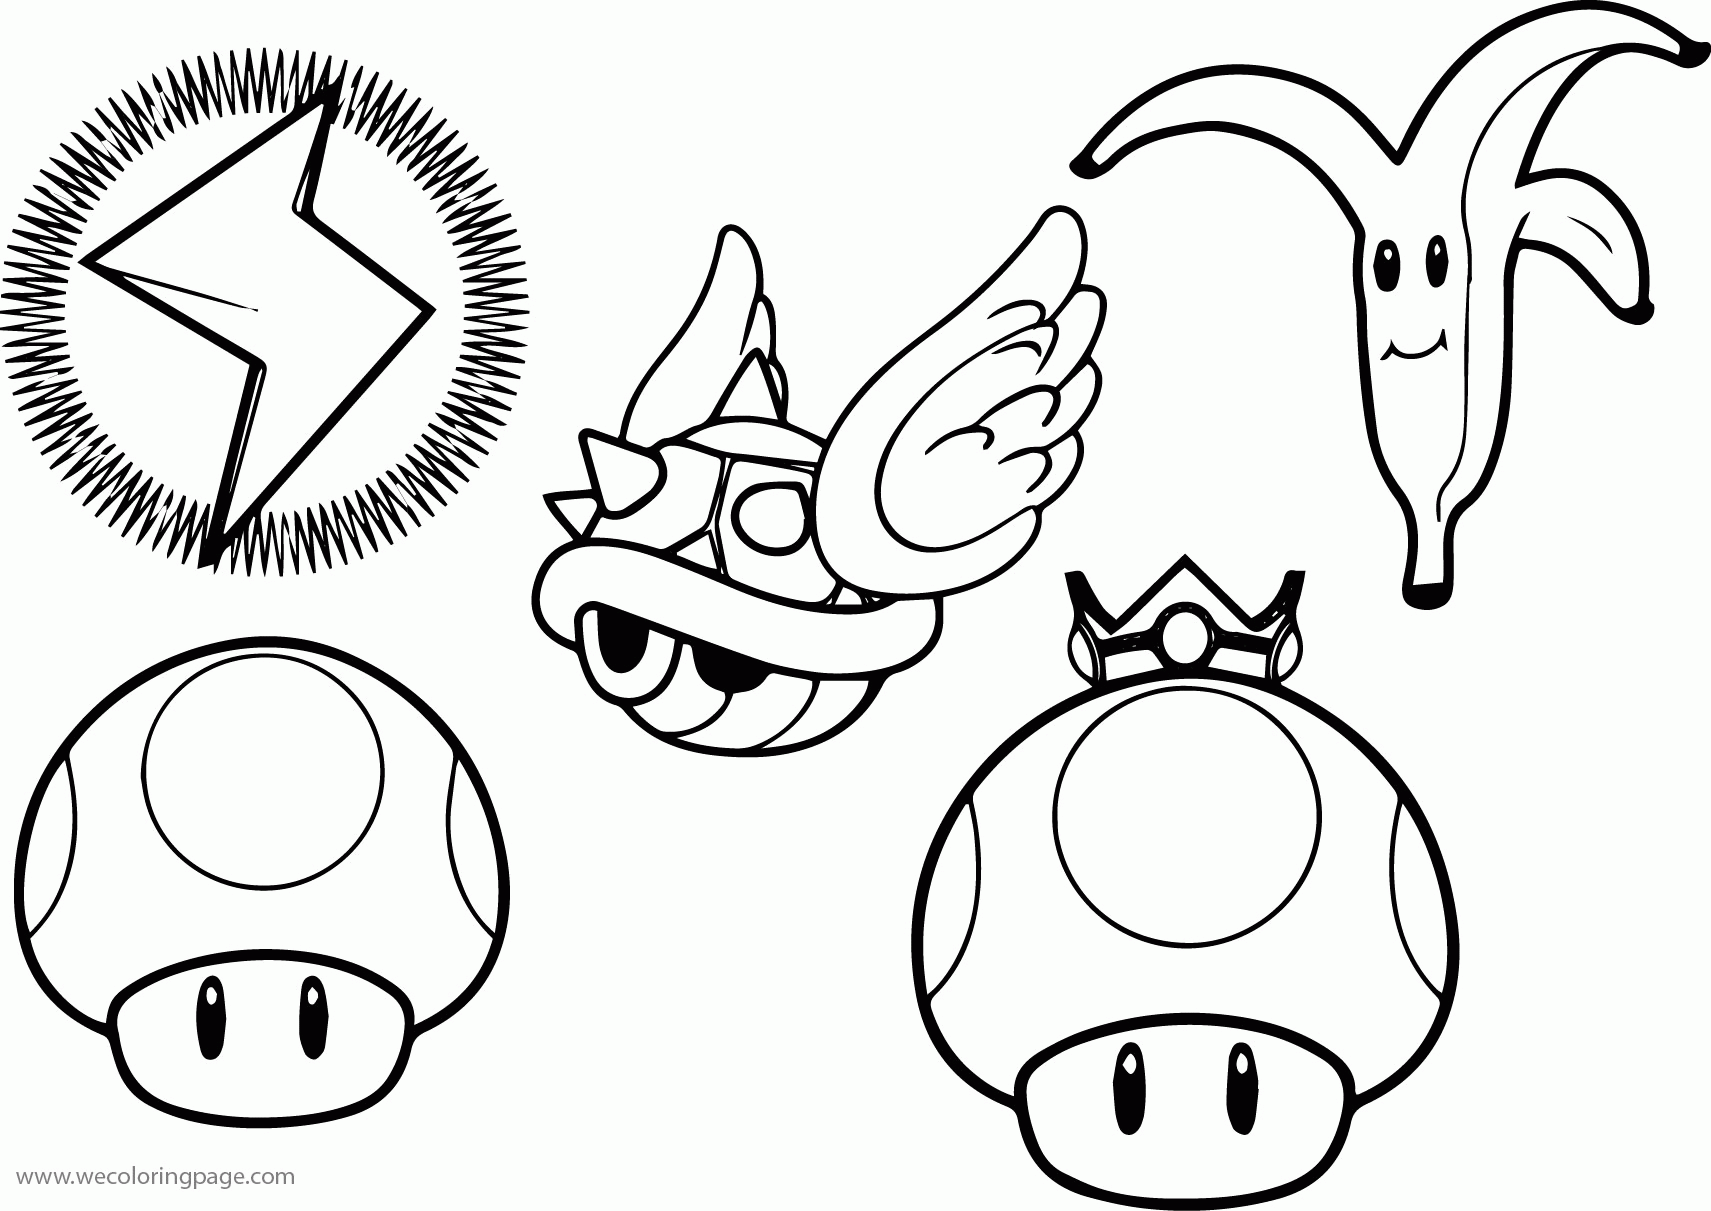 Super Mario Characters Coloring Page 03 | Wecoloringpage